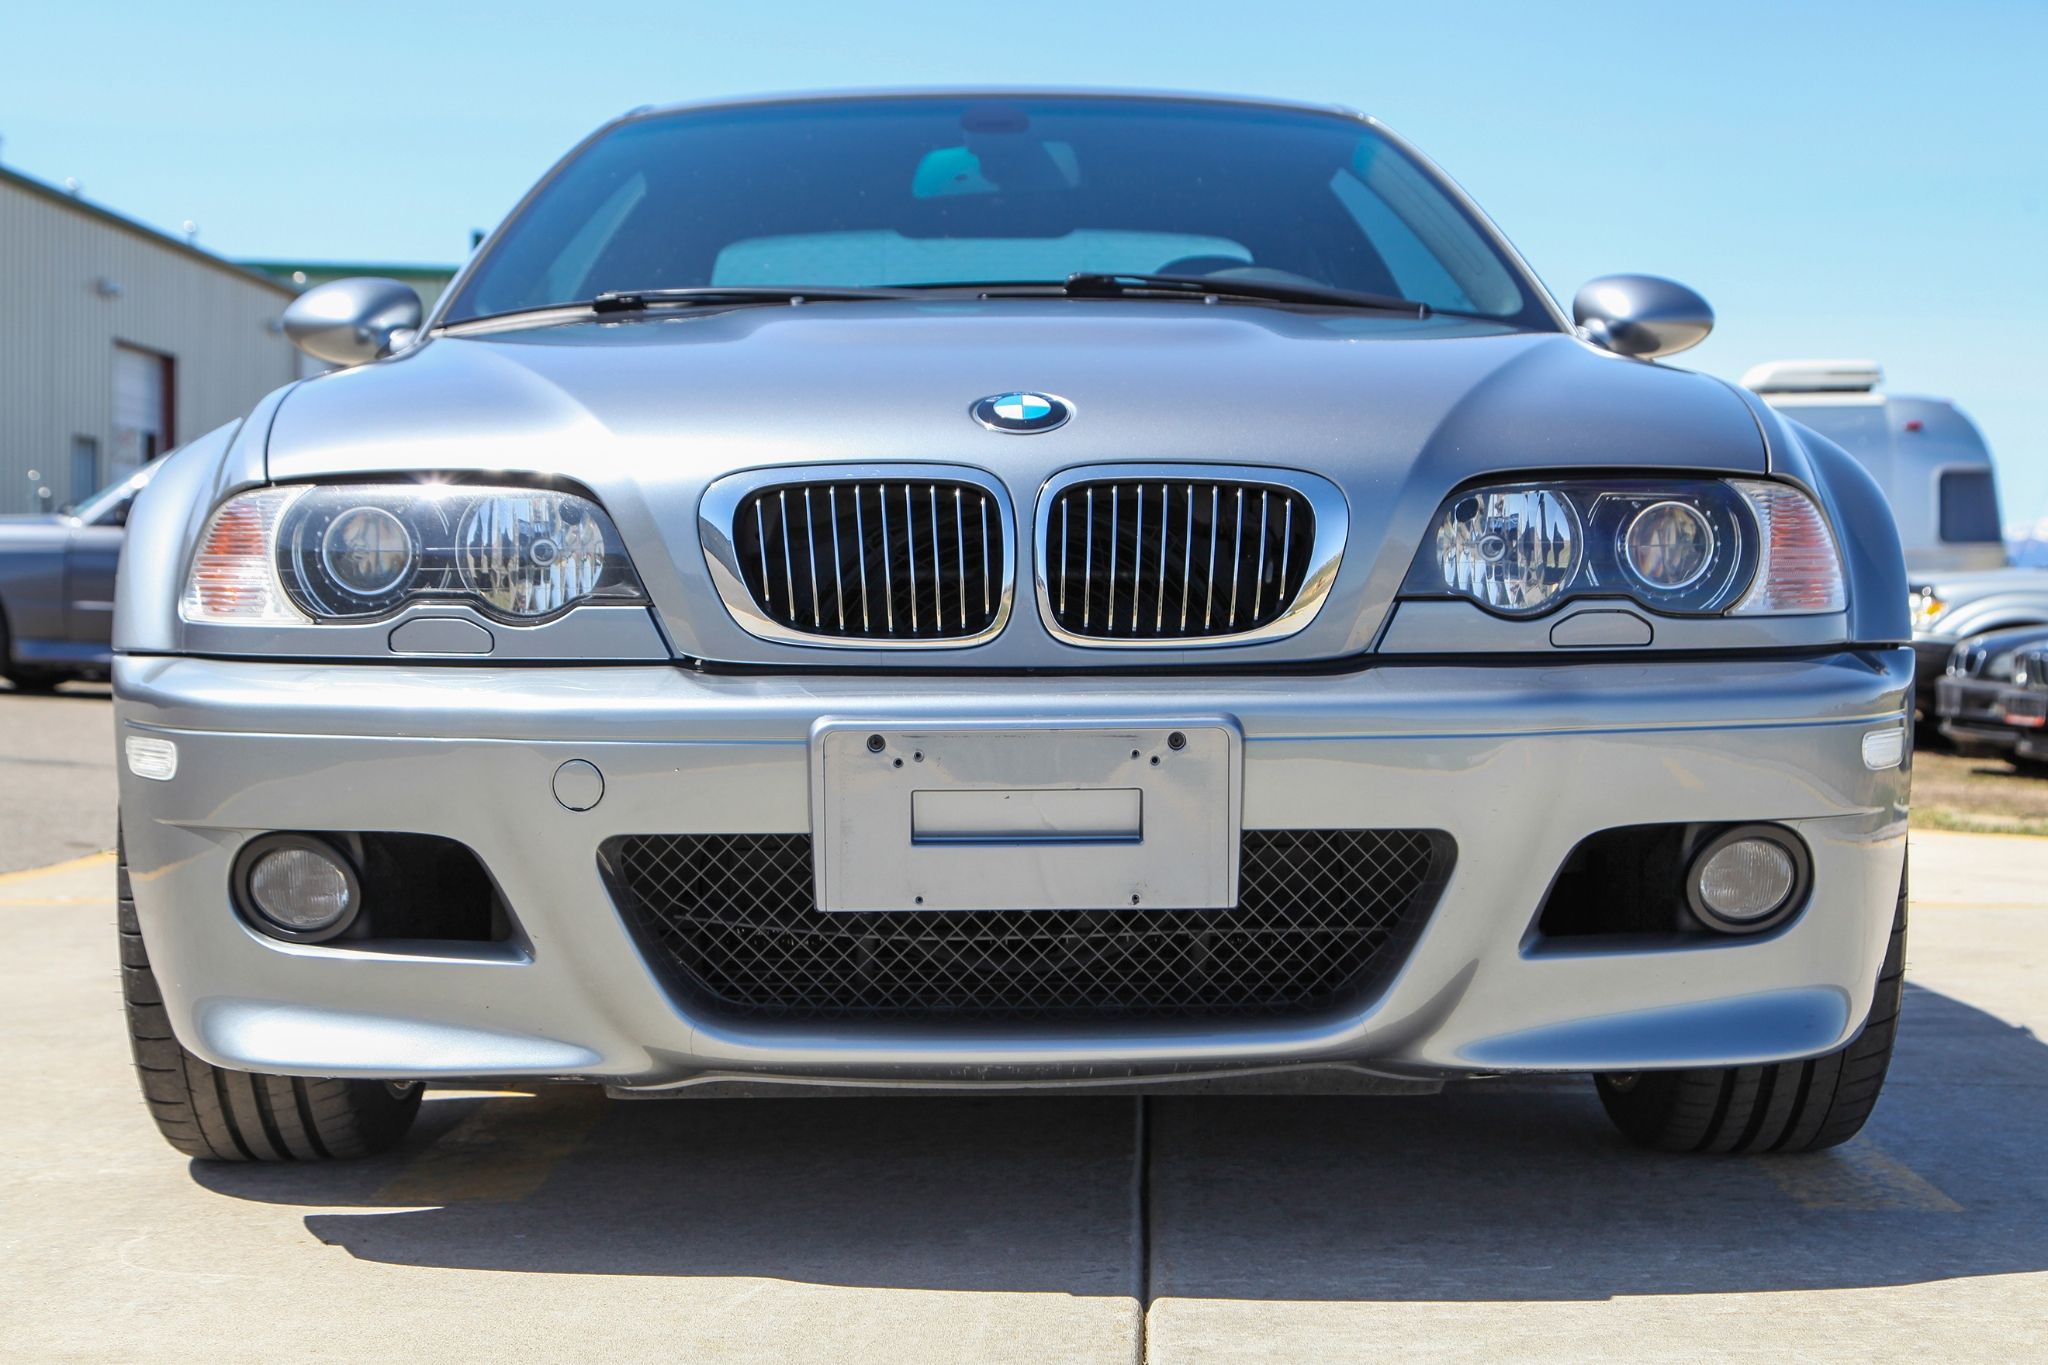 Logisk Sprællemand hav det sjovt New BMW 3-Series' Notched Headlights Were Inspired By The E46 | Carscoops